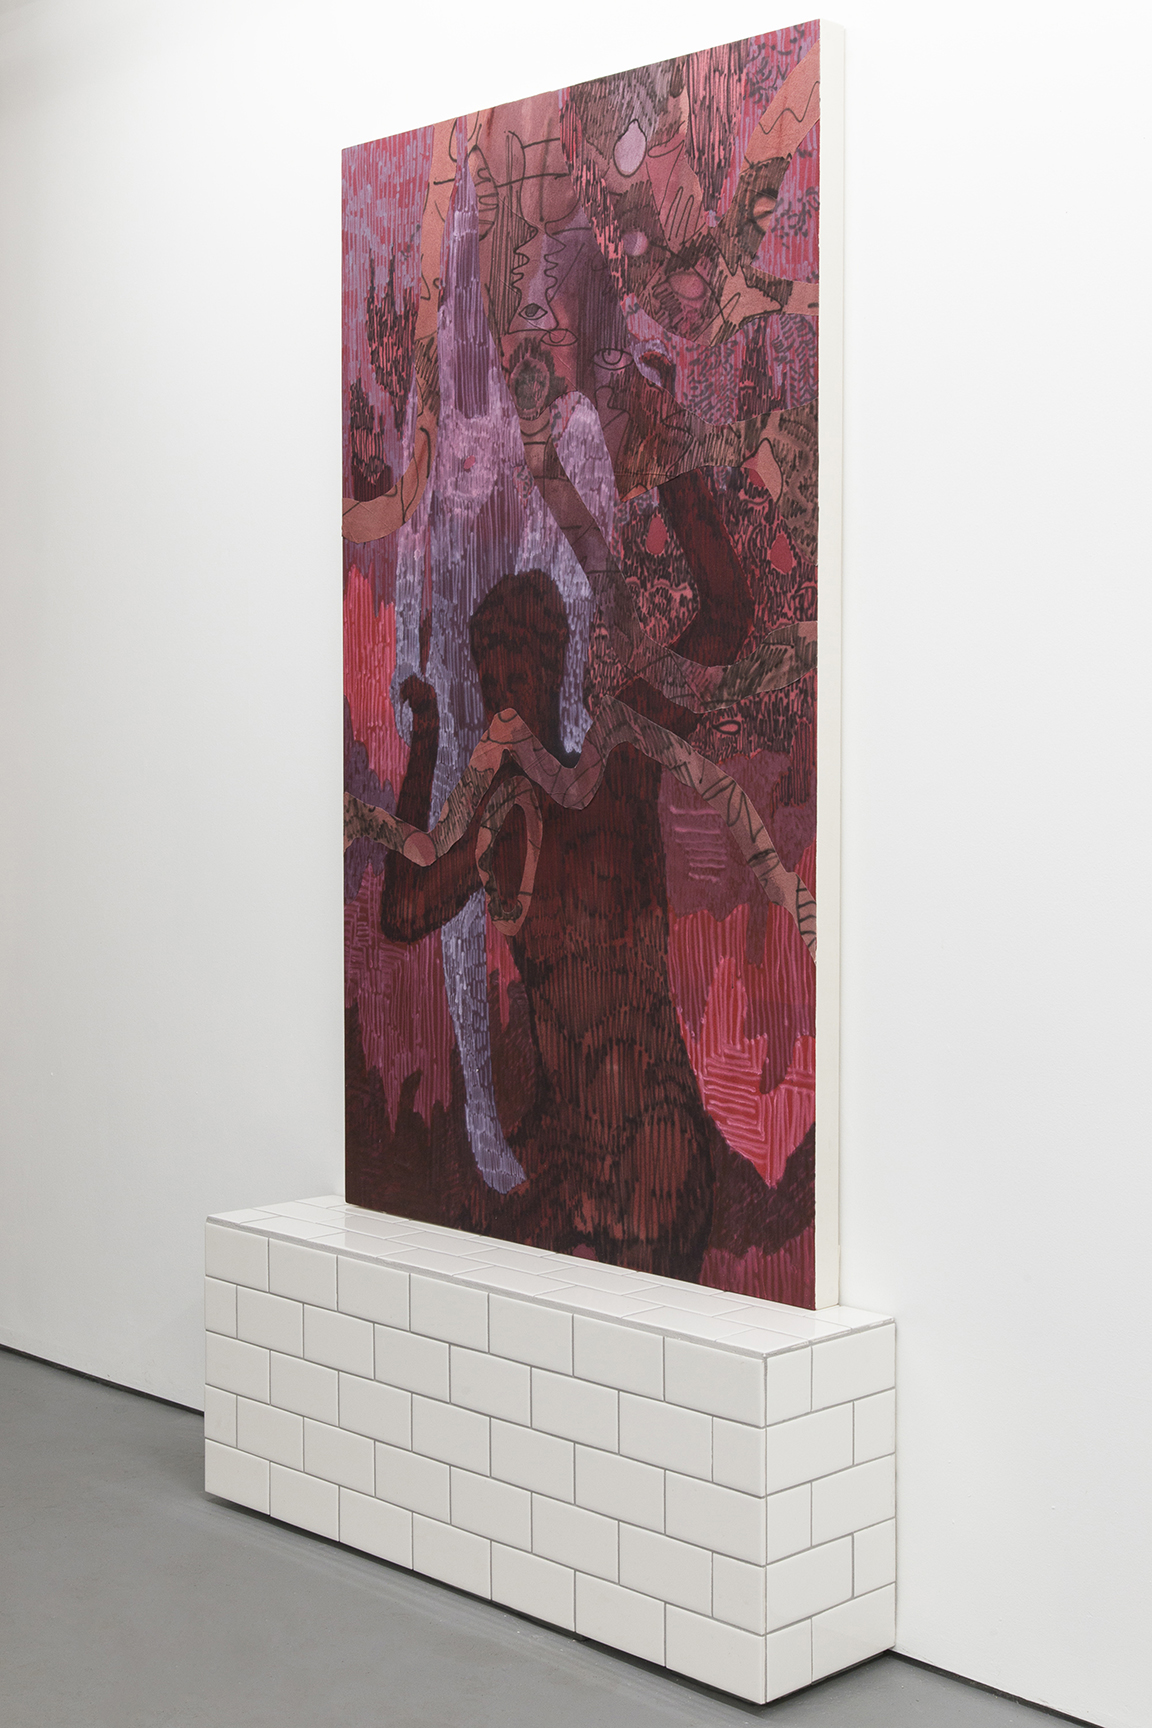 It could be easier together, 2015, 38 x 60 inches, acrylic on cotton. Tile stand, wood and ceramic tiles.